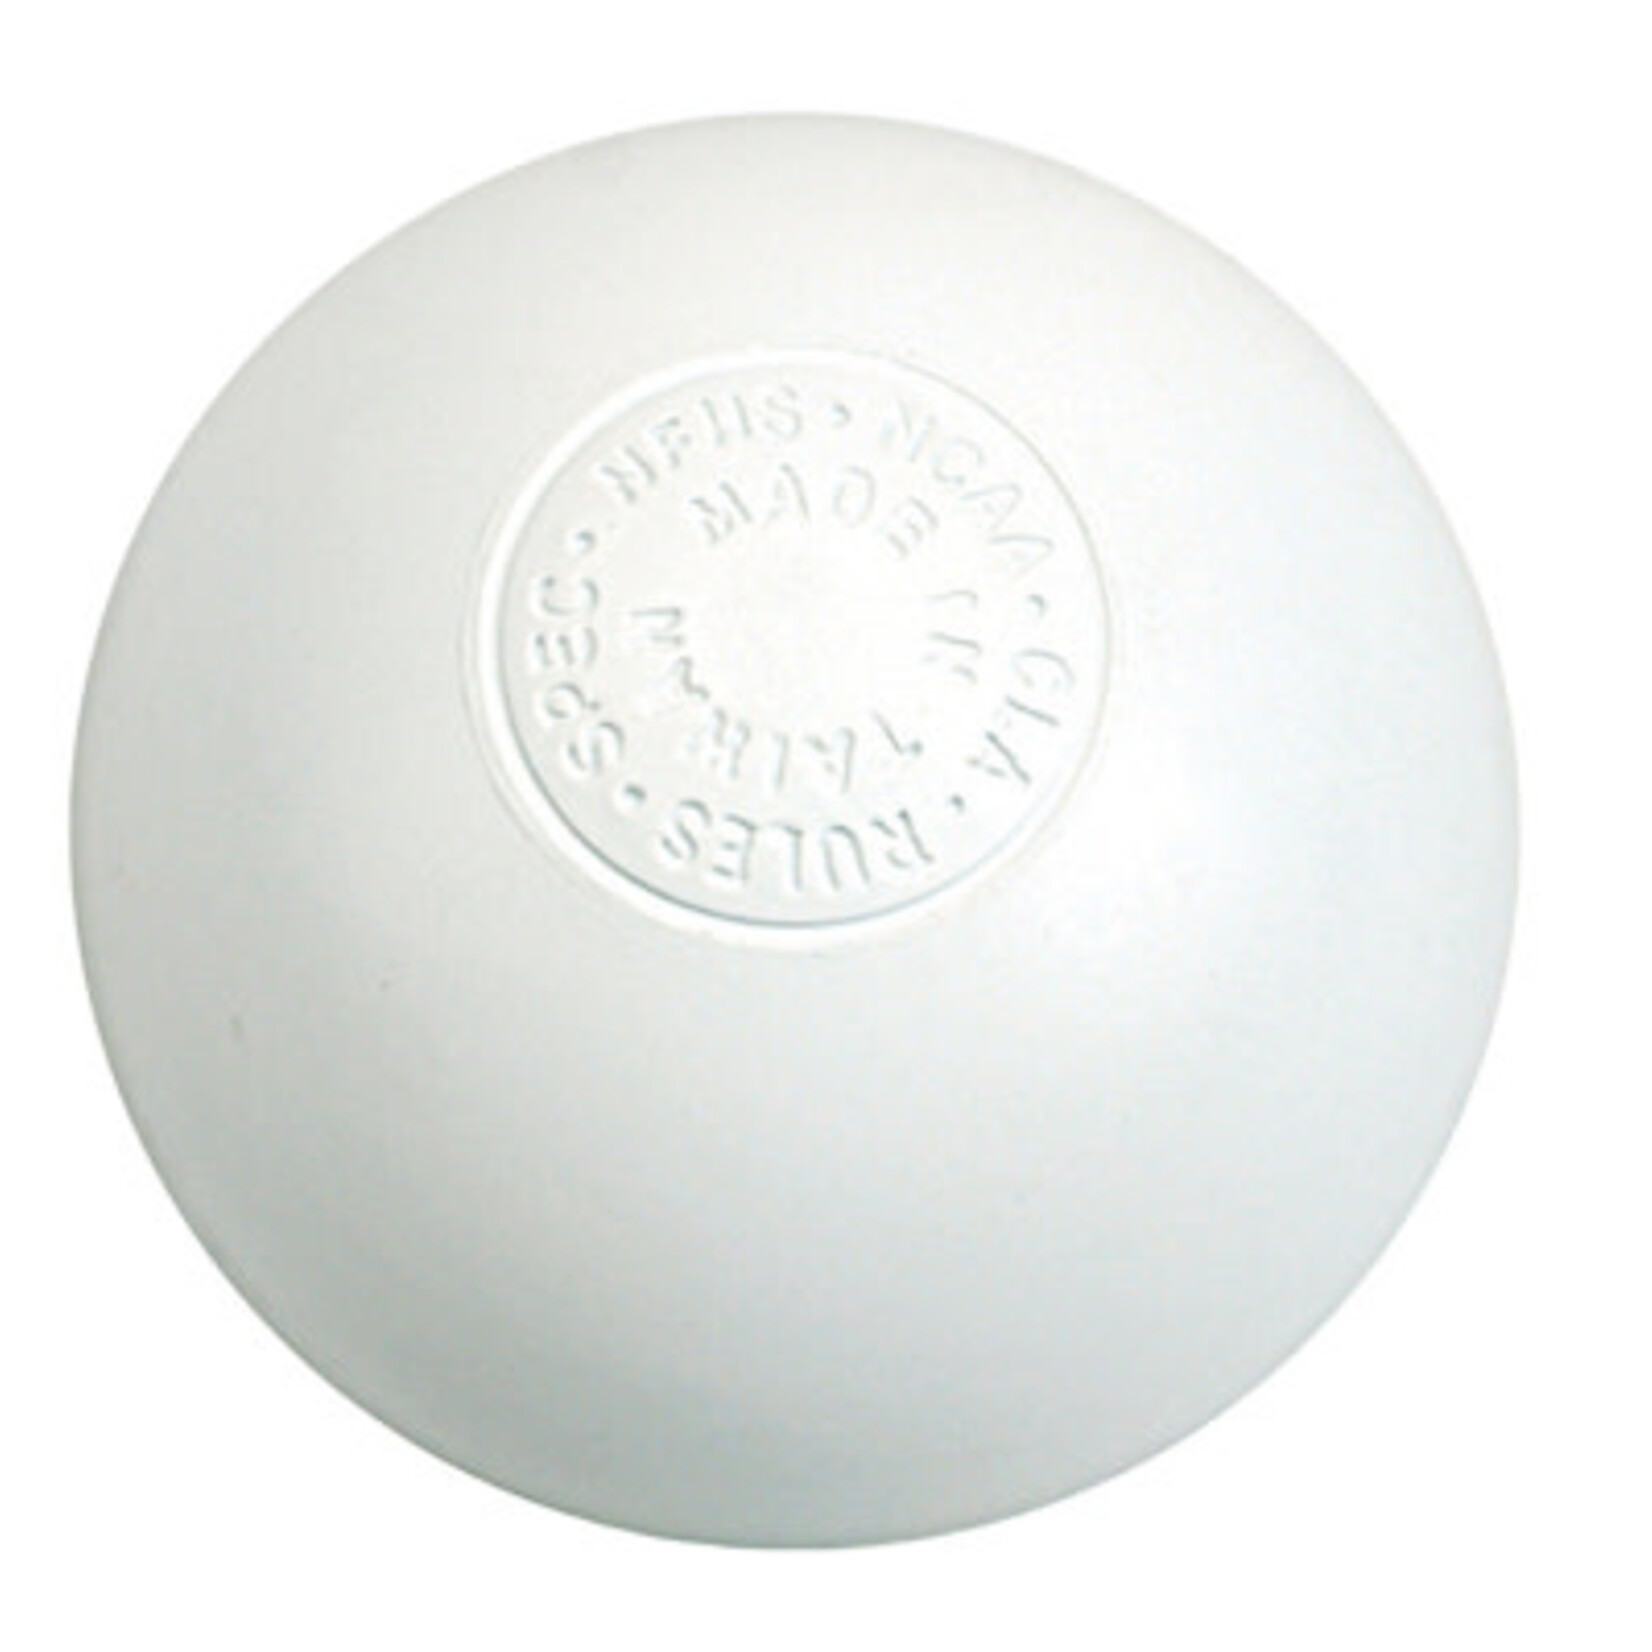 360 Athletics Official Lacrosse Ball